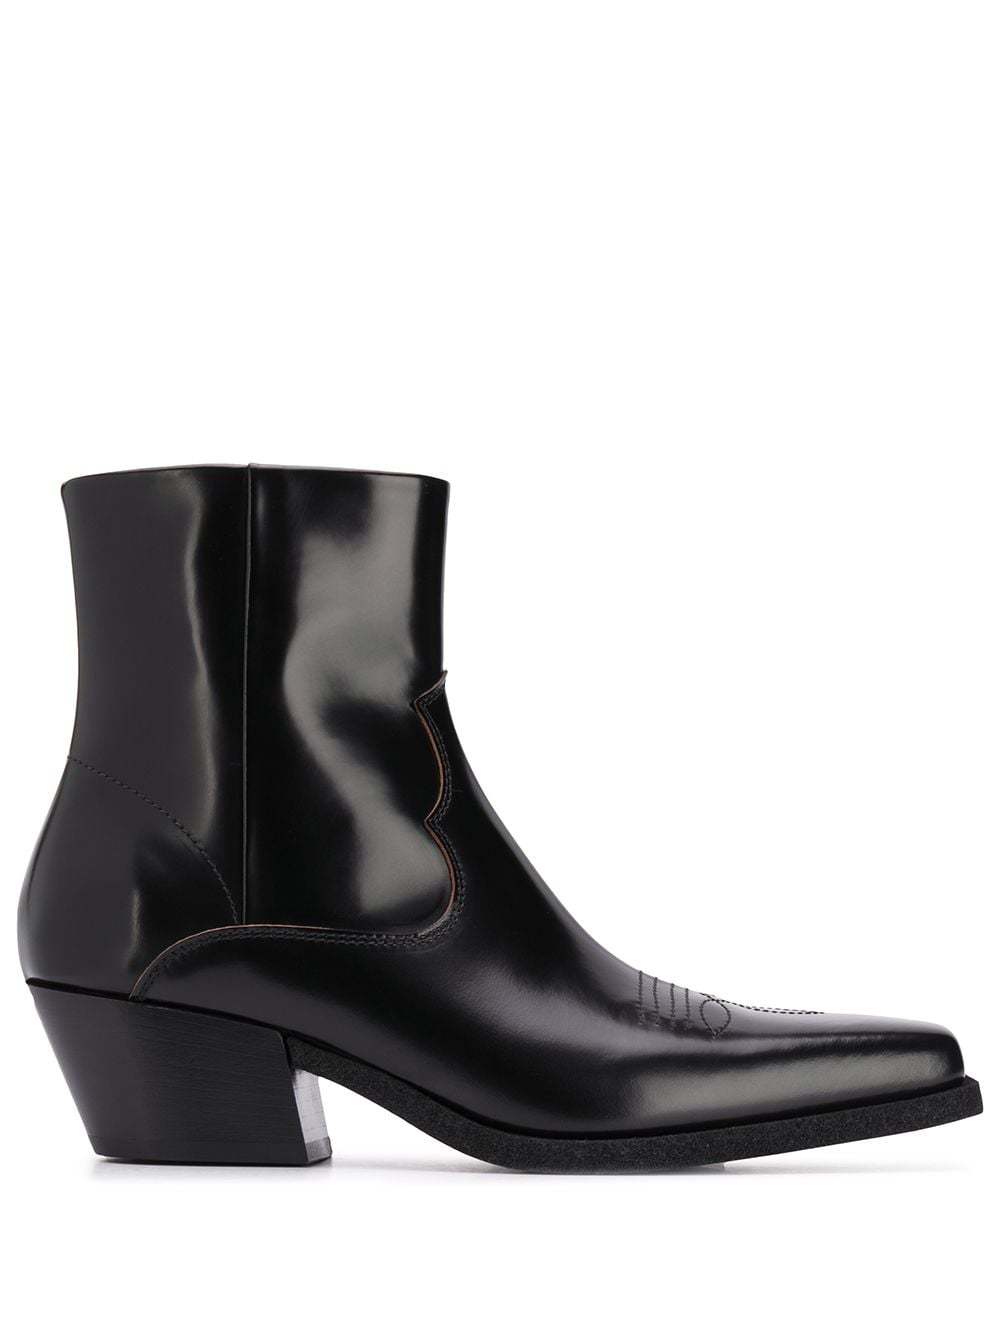 Off-White Paperclip Square Toe Ankle Boots, $597 | farfetch.com | Lookastic